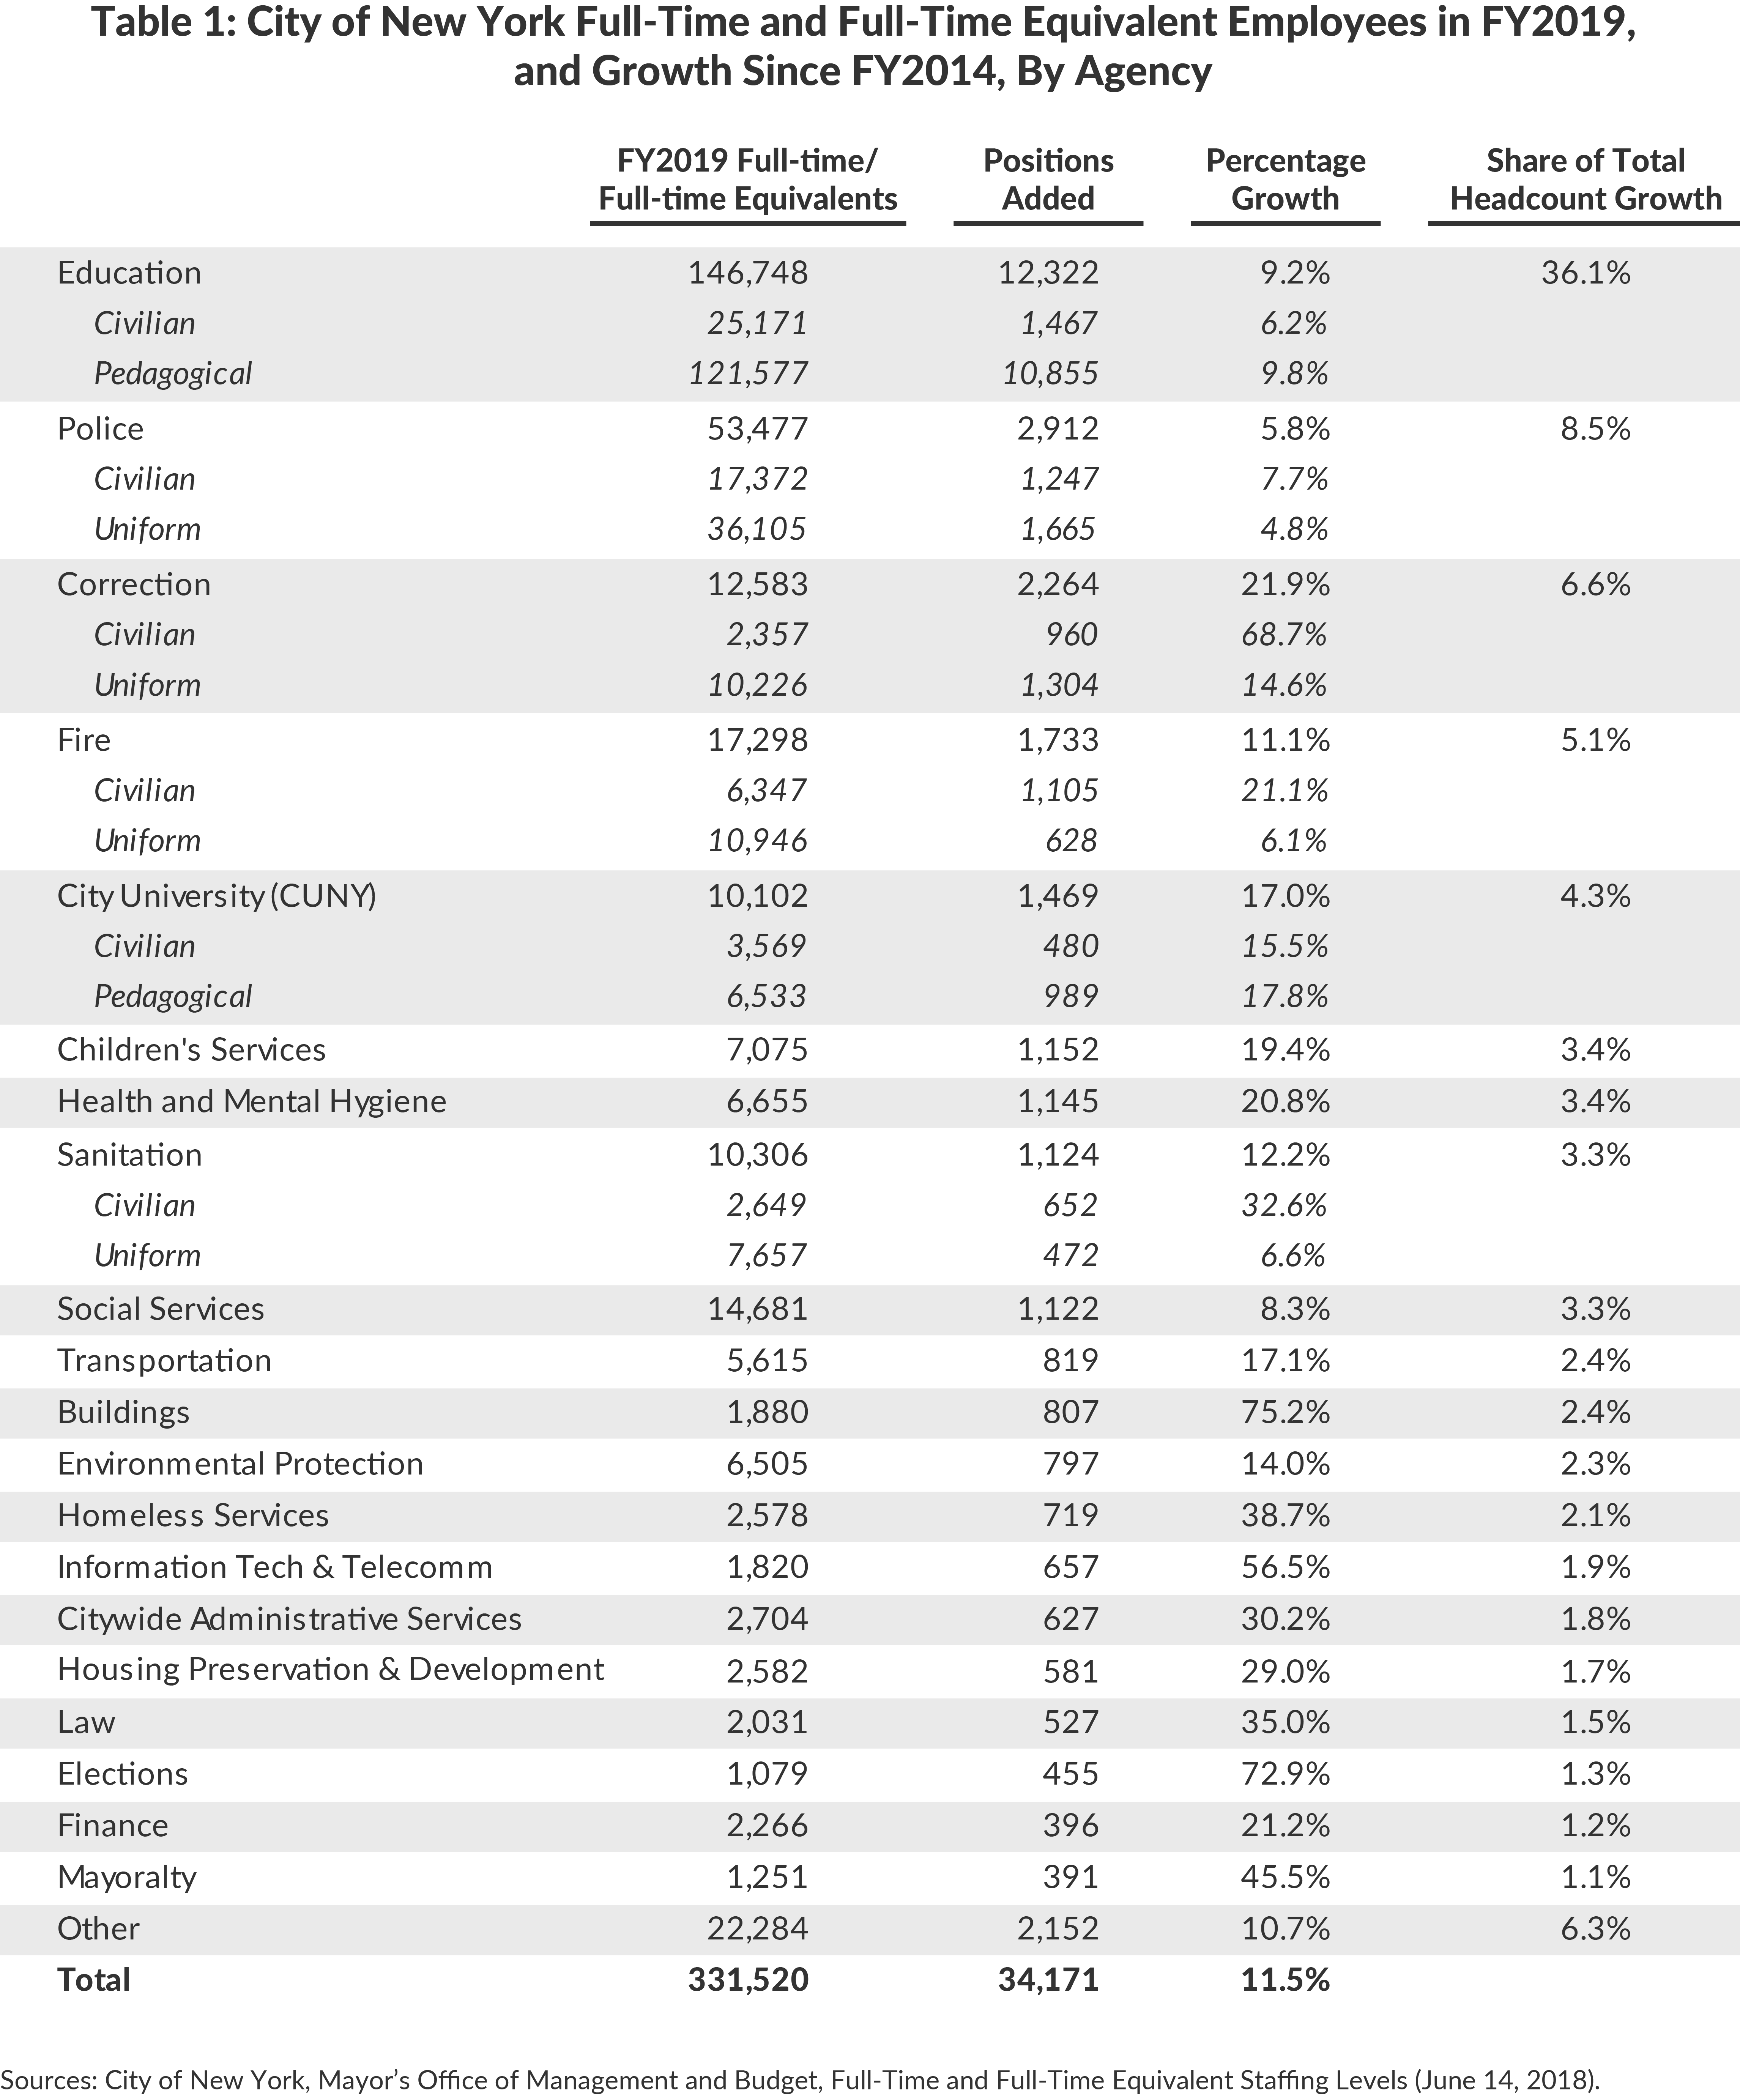 Table 1: City of New York Full-Time and Full-Time Equivalent Employees in FY2019, and Growth Since FY2014, By Agency